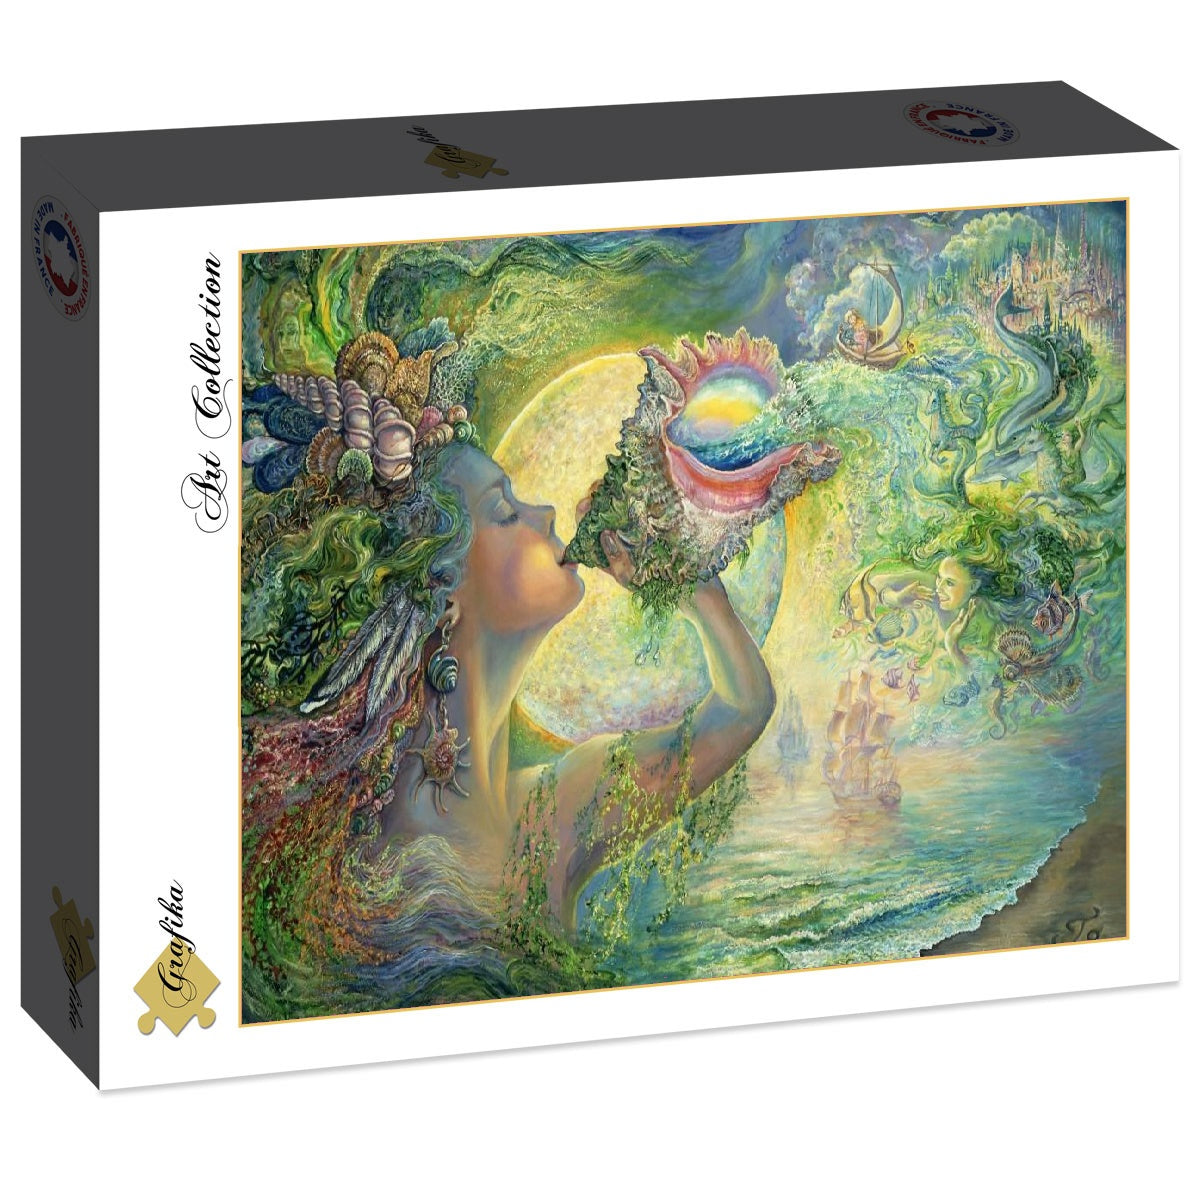 Call of the Sea by Josephine Wall, 1000 Piece Puzzle